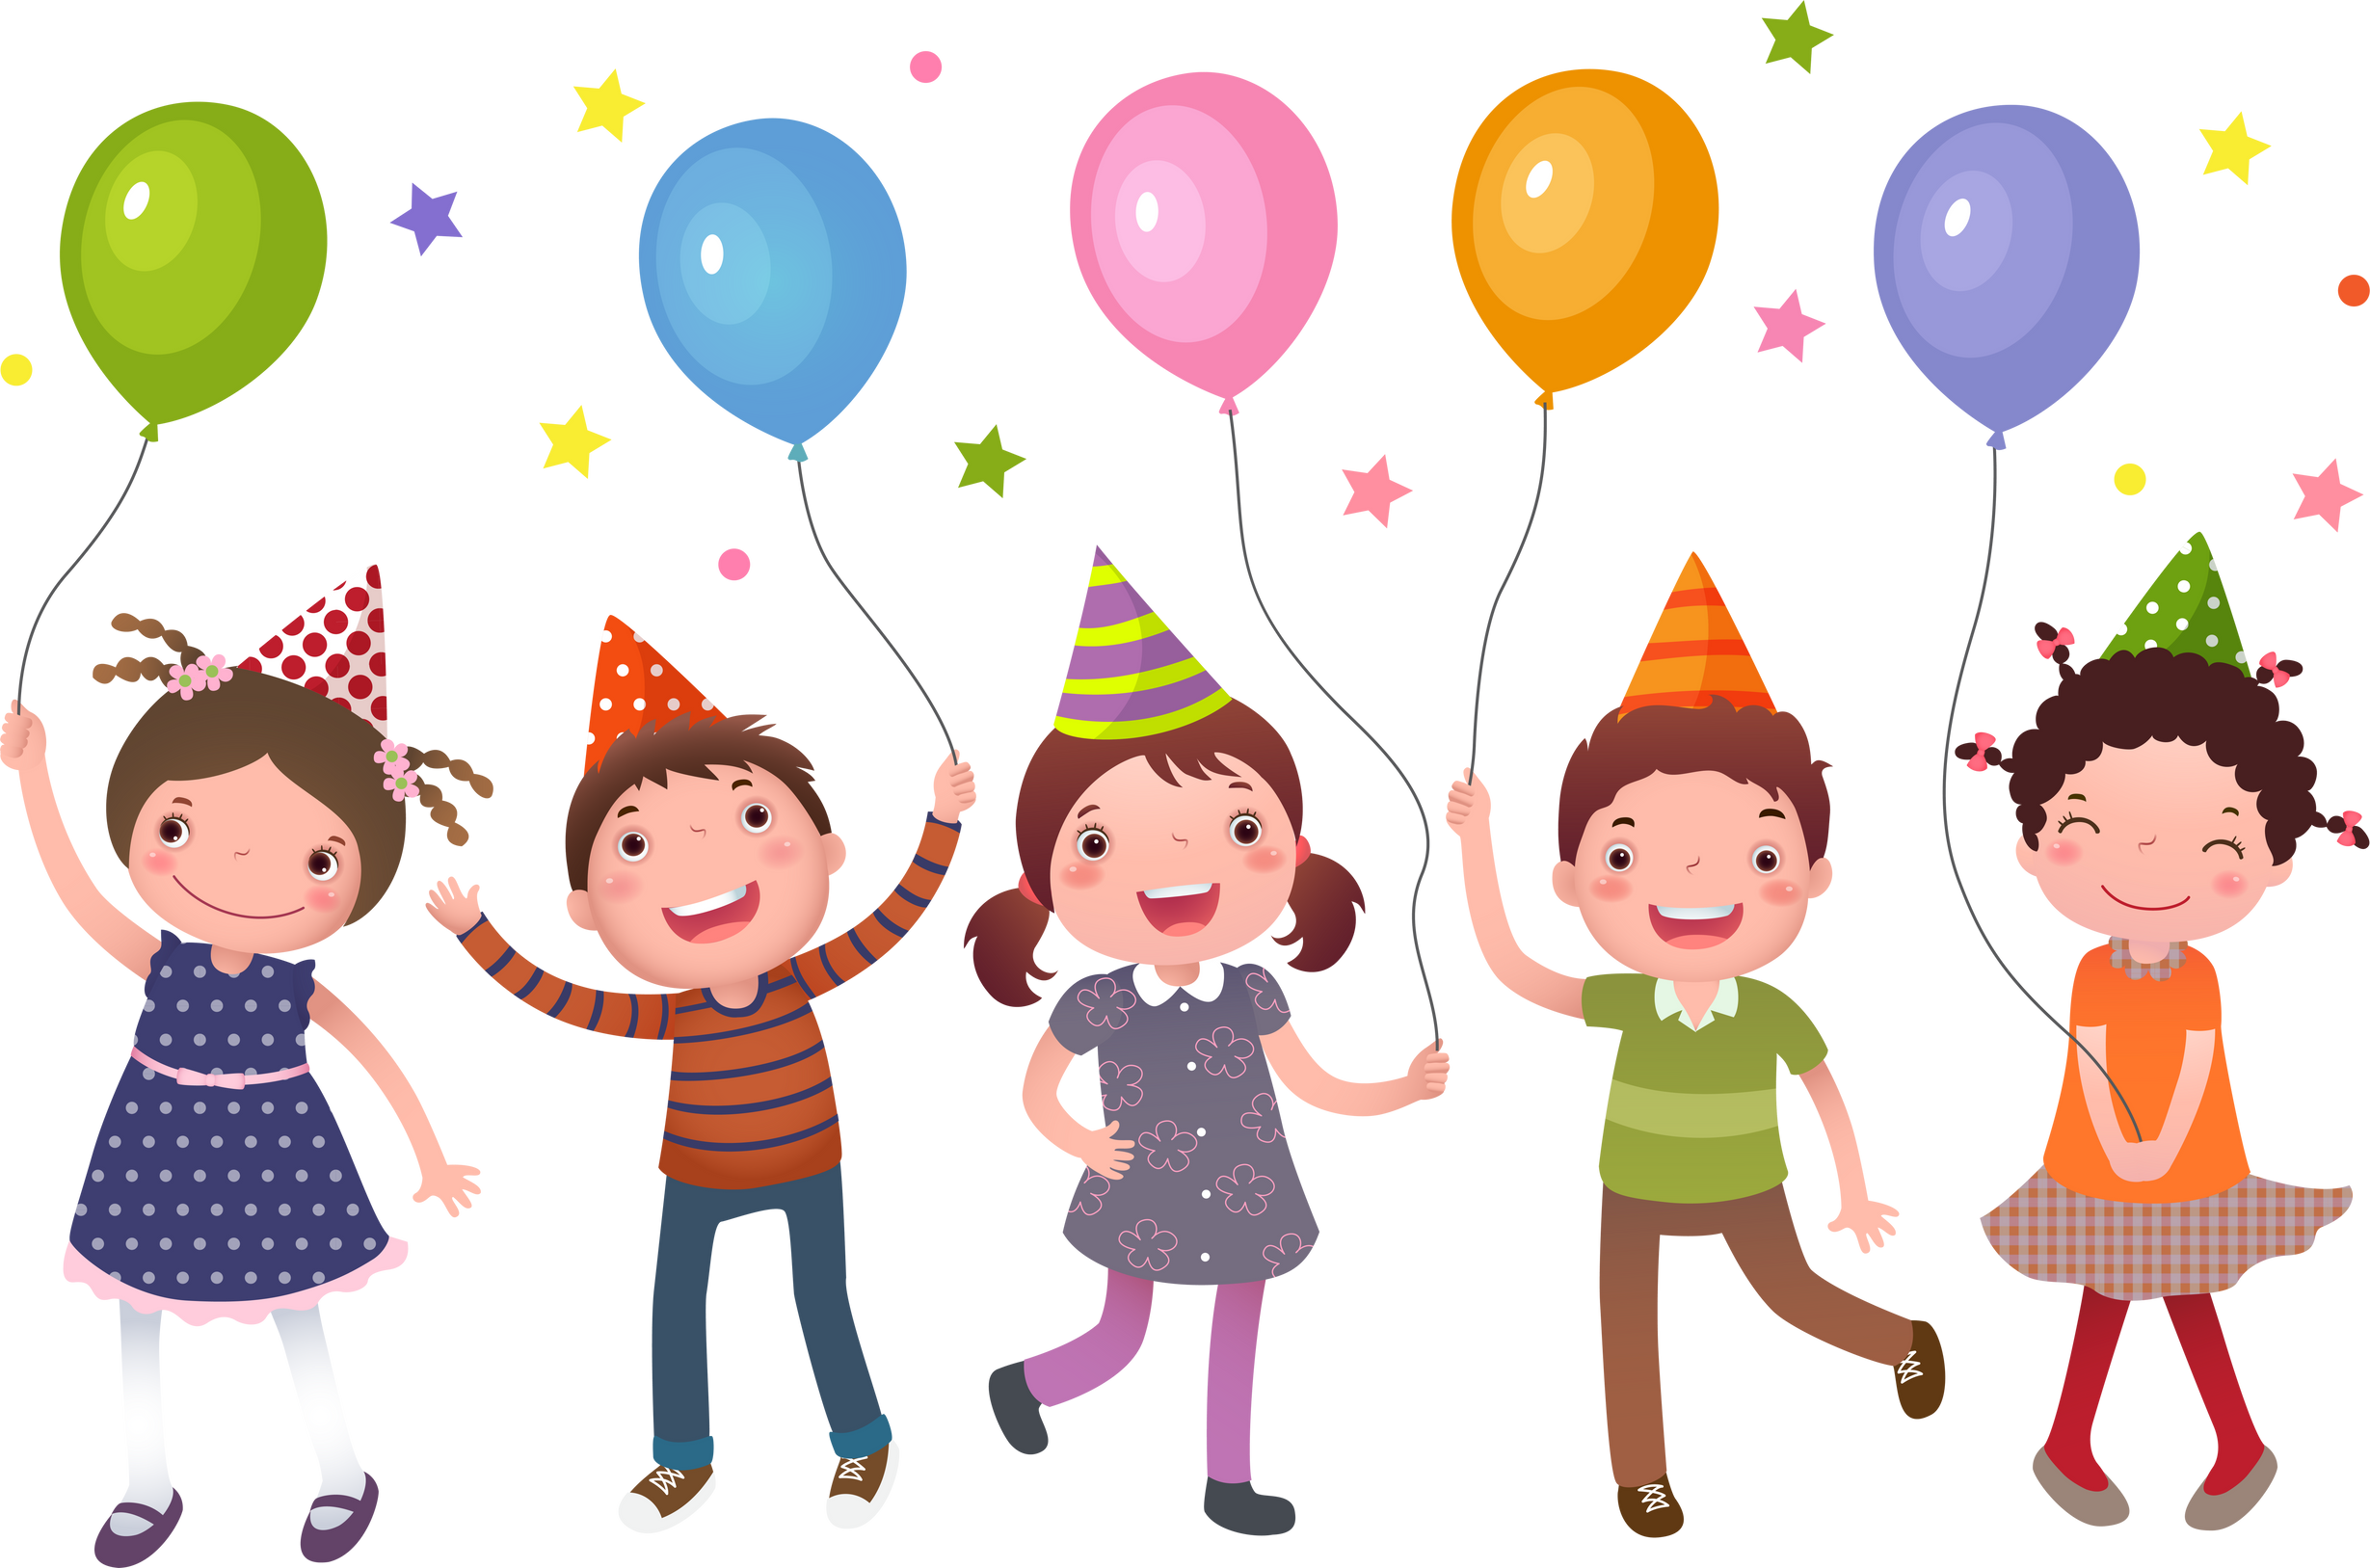 Kids; holding; colorful; balloons; party; cartoon; children;